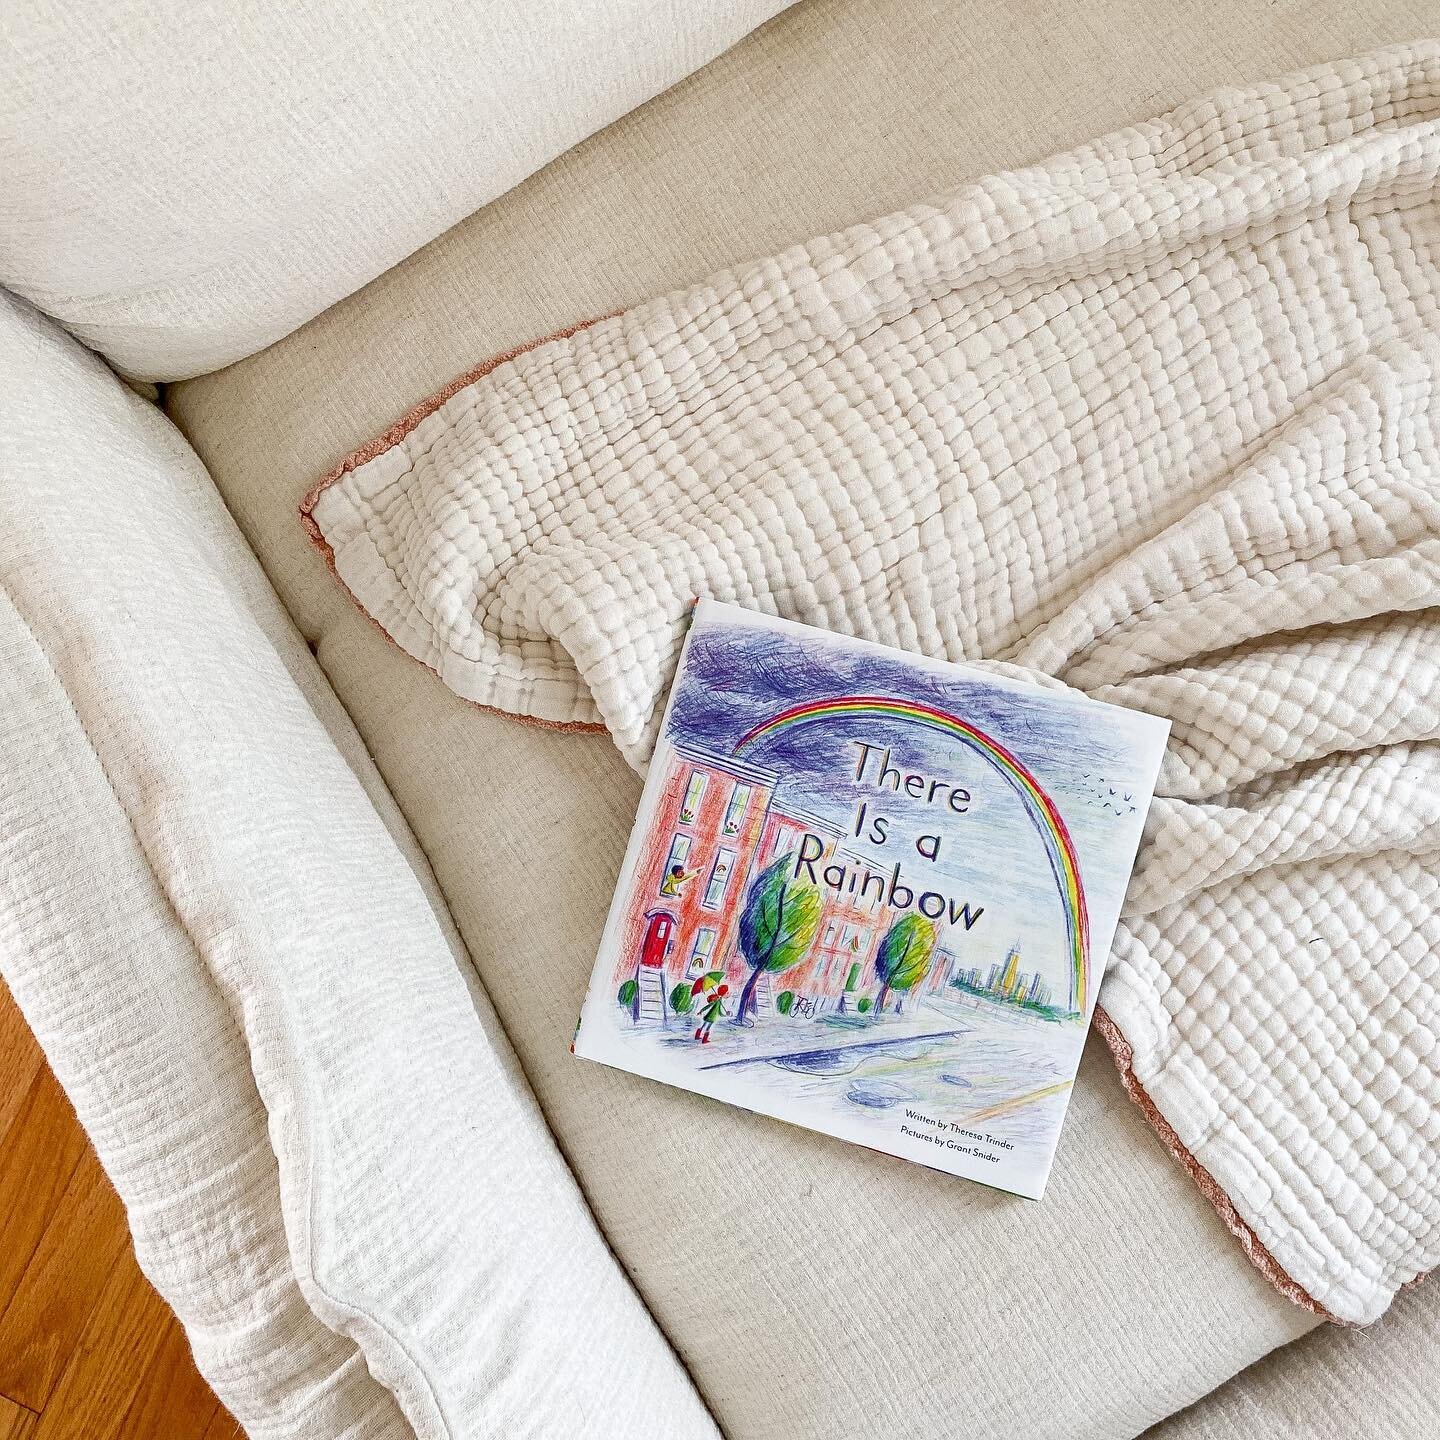 Parent of the pandemic&mdash; a role I&rsquo;ve been stumbling through &amp; navigating day-by-day, moment-by-moment for a full year now. &ldquo;There Is a Rainbow&rdquo;, published by @chroniclebooks, is a reminder for me as much as it is for my lit